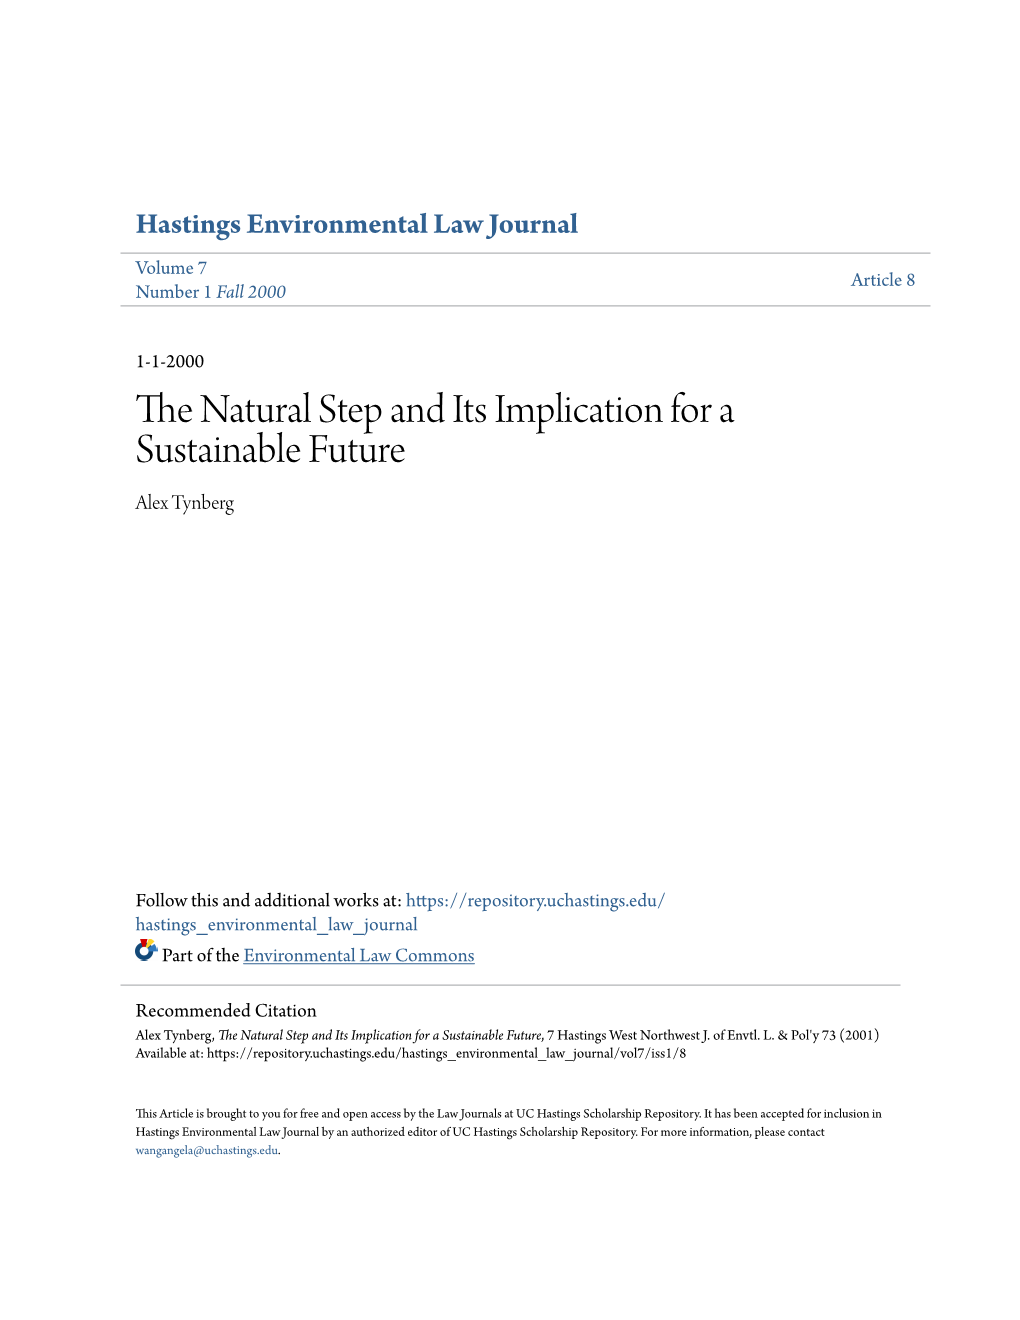 The Natural Step and Its Implication for a Sustainable Future, 7 Hastings West Northwest J